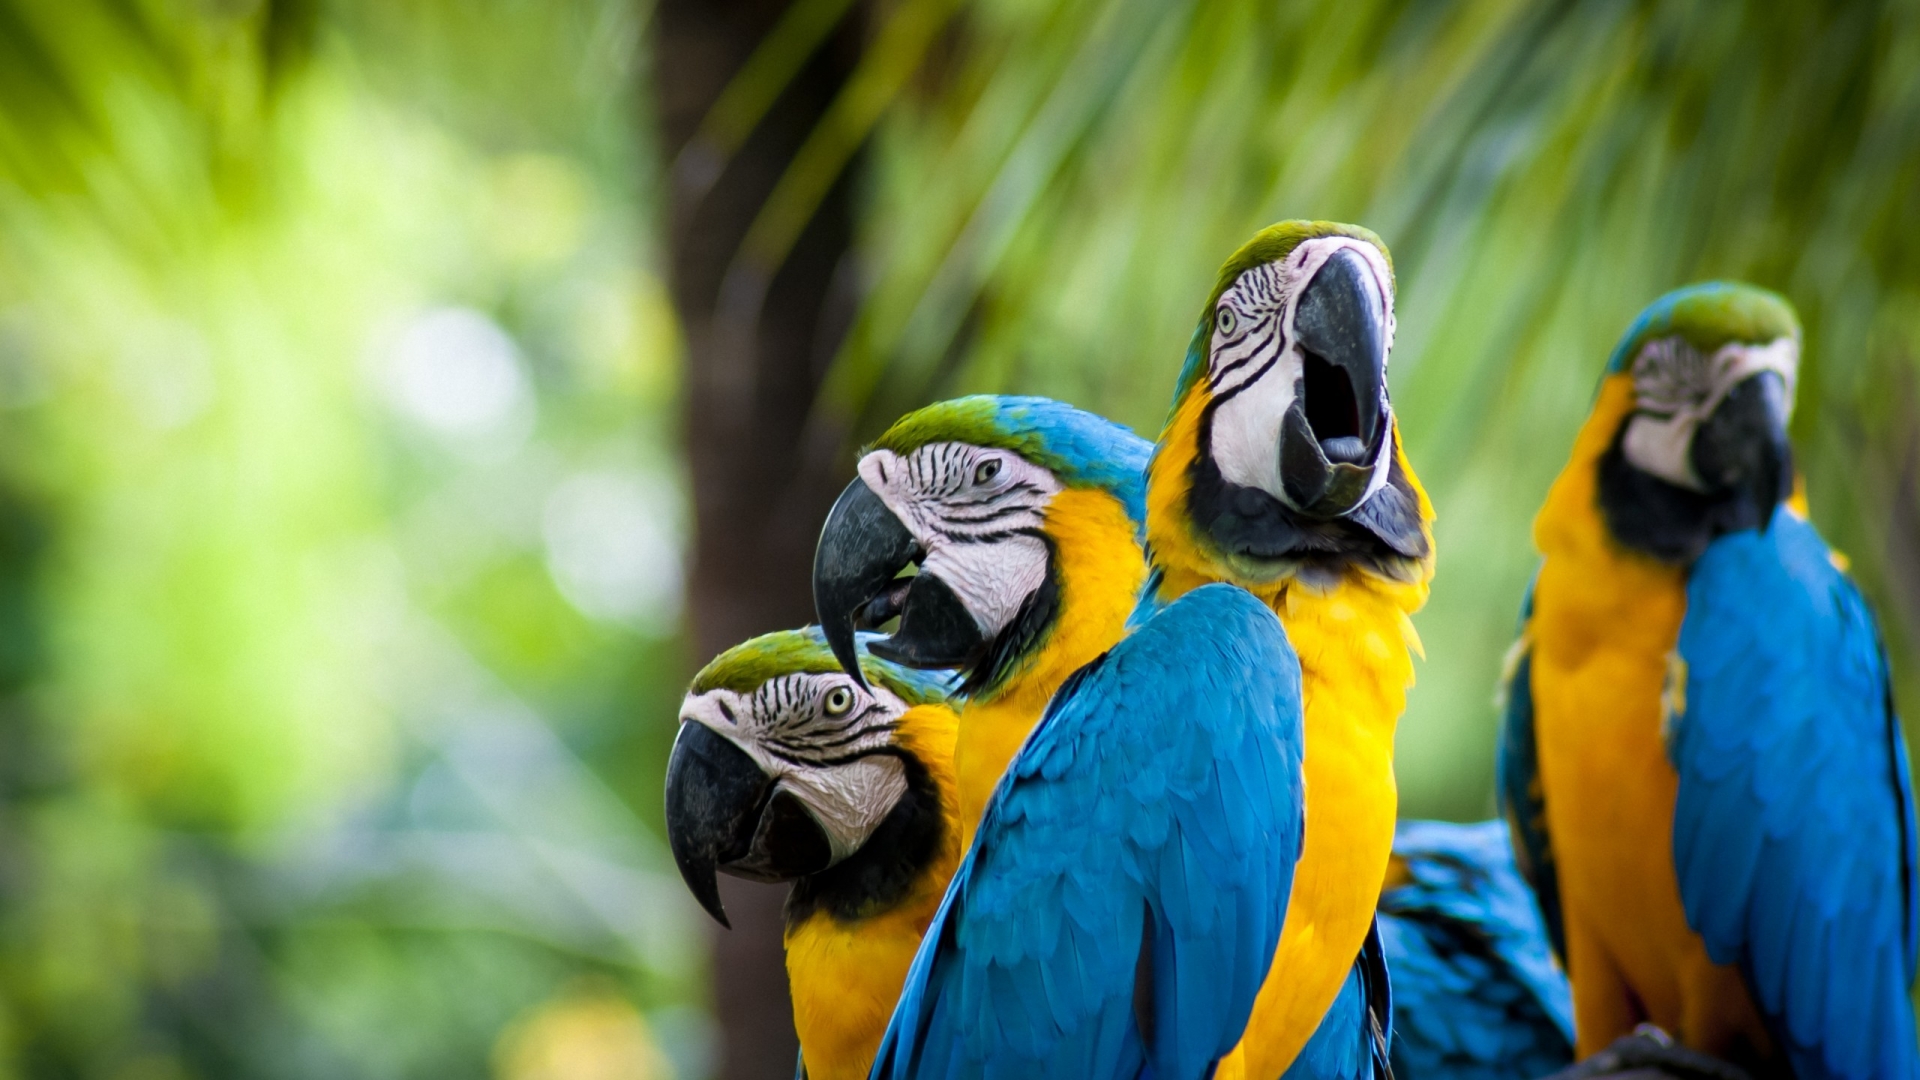 Beautiful Parrots Family for 1920 x 1080 HDTV 1080p resolution